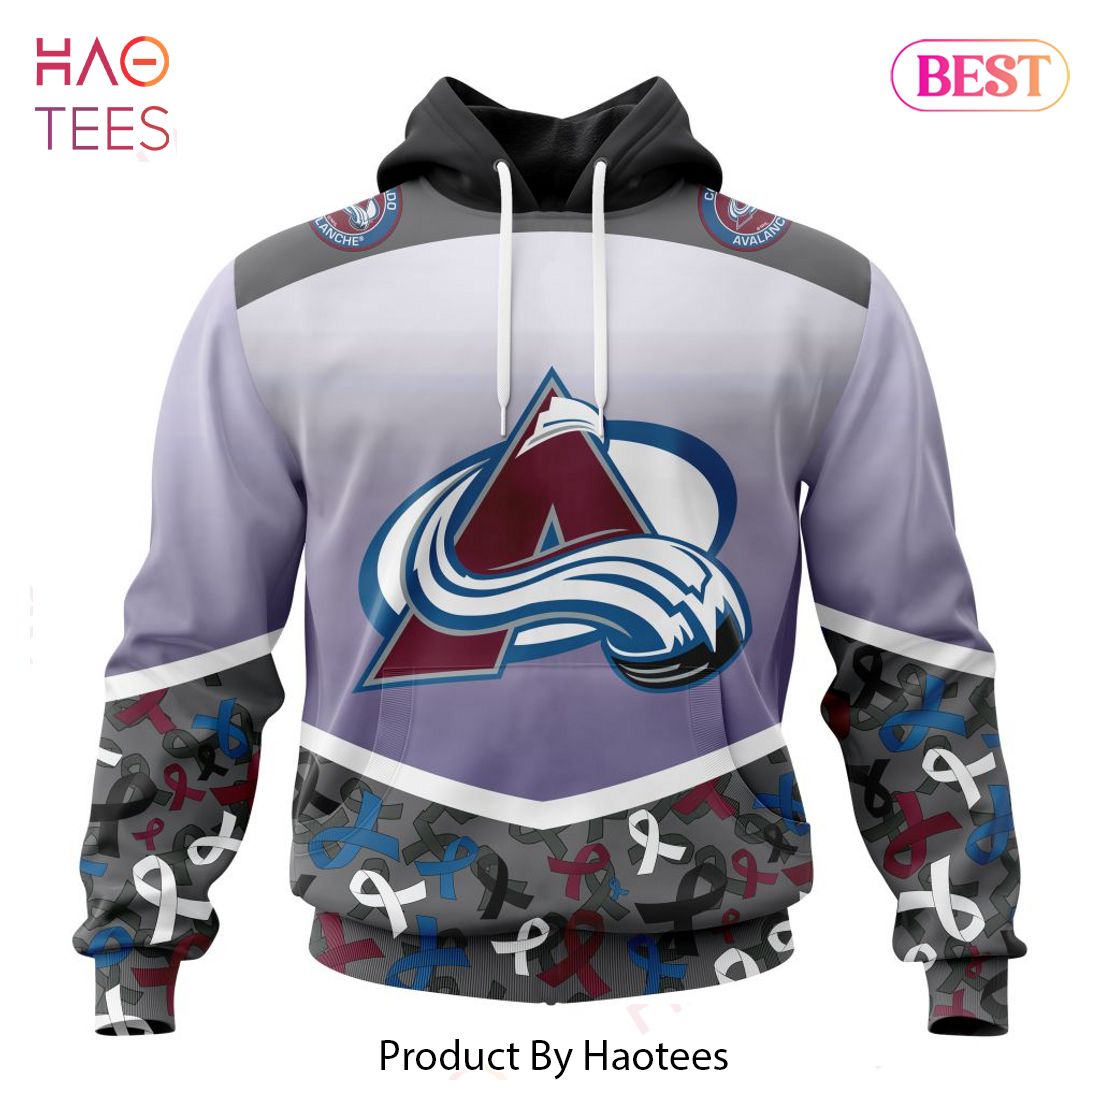 BEST NHL Colorado Avalanche Specialized Sport Fights Again All Cancer 3D Hoodie